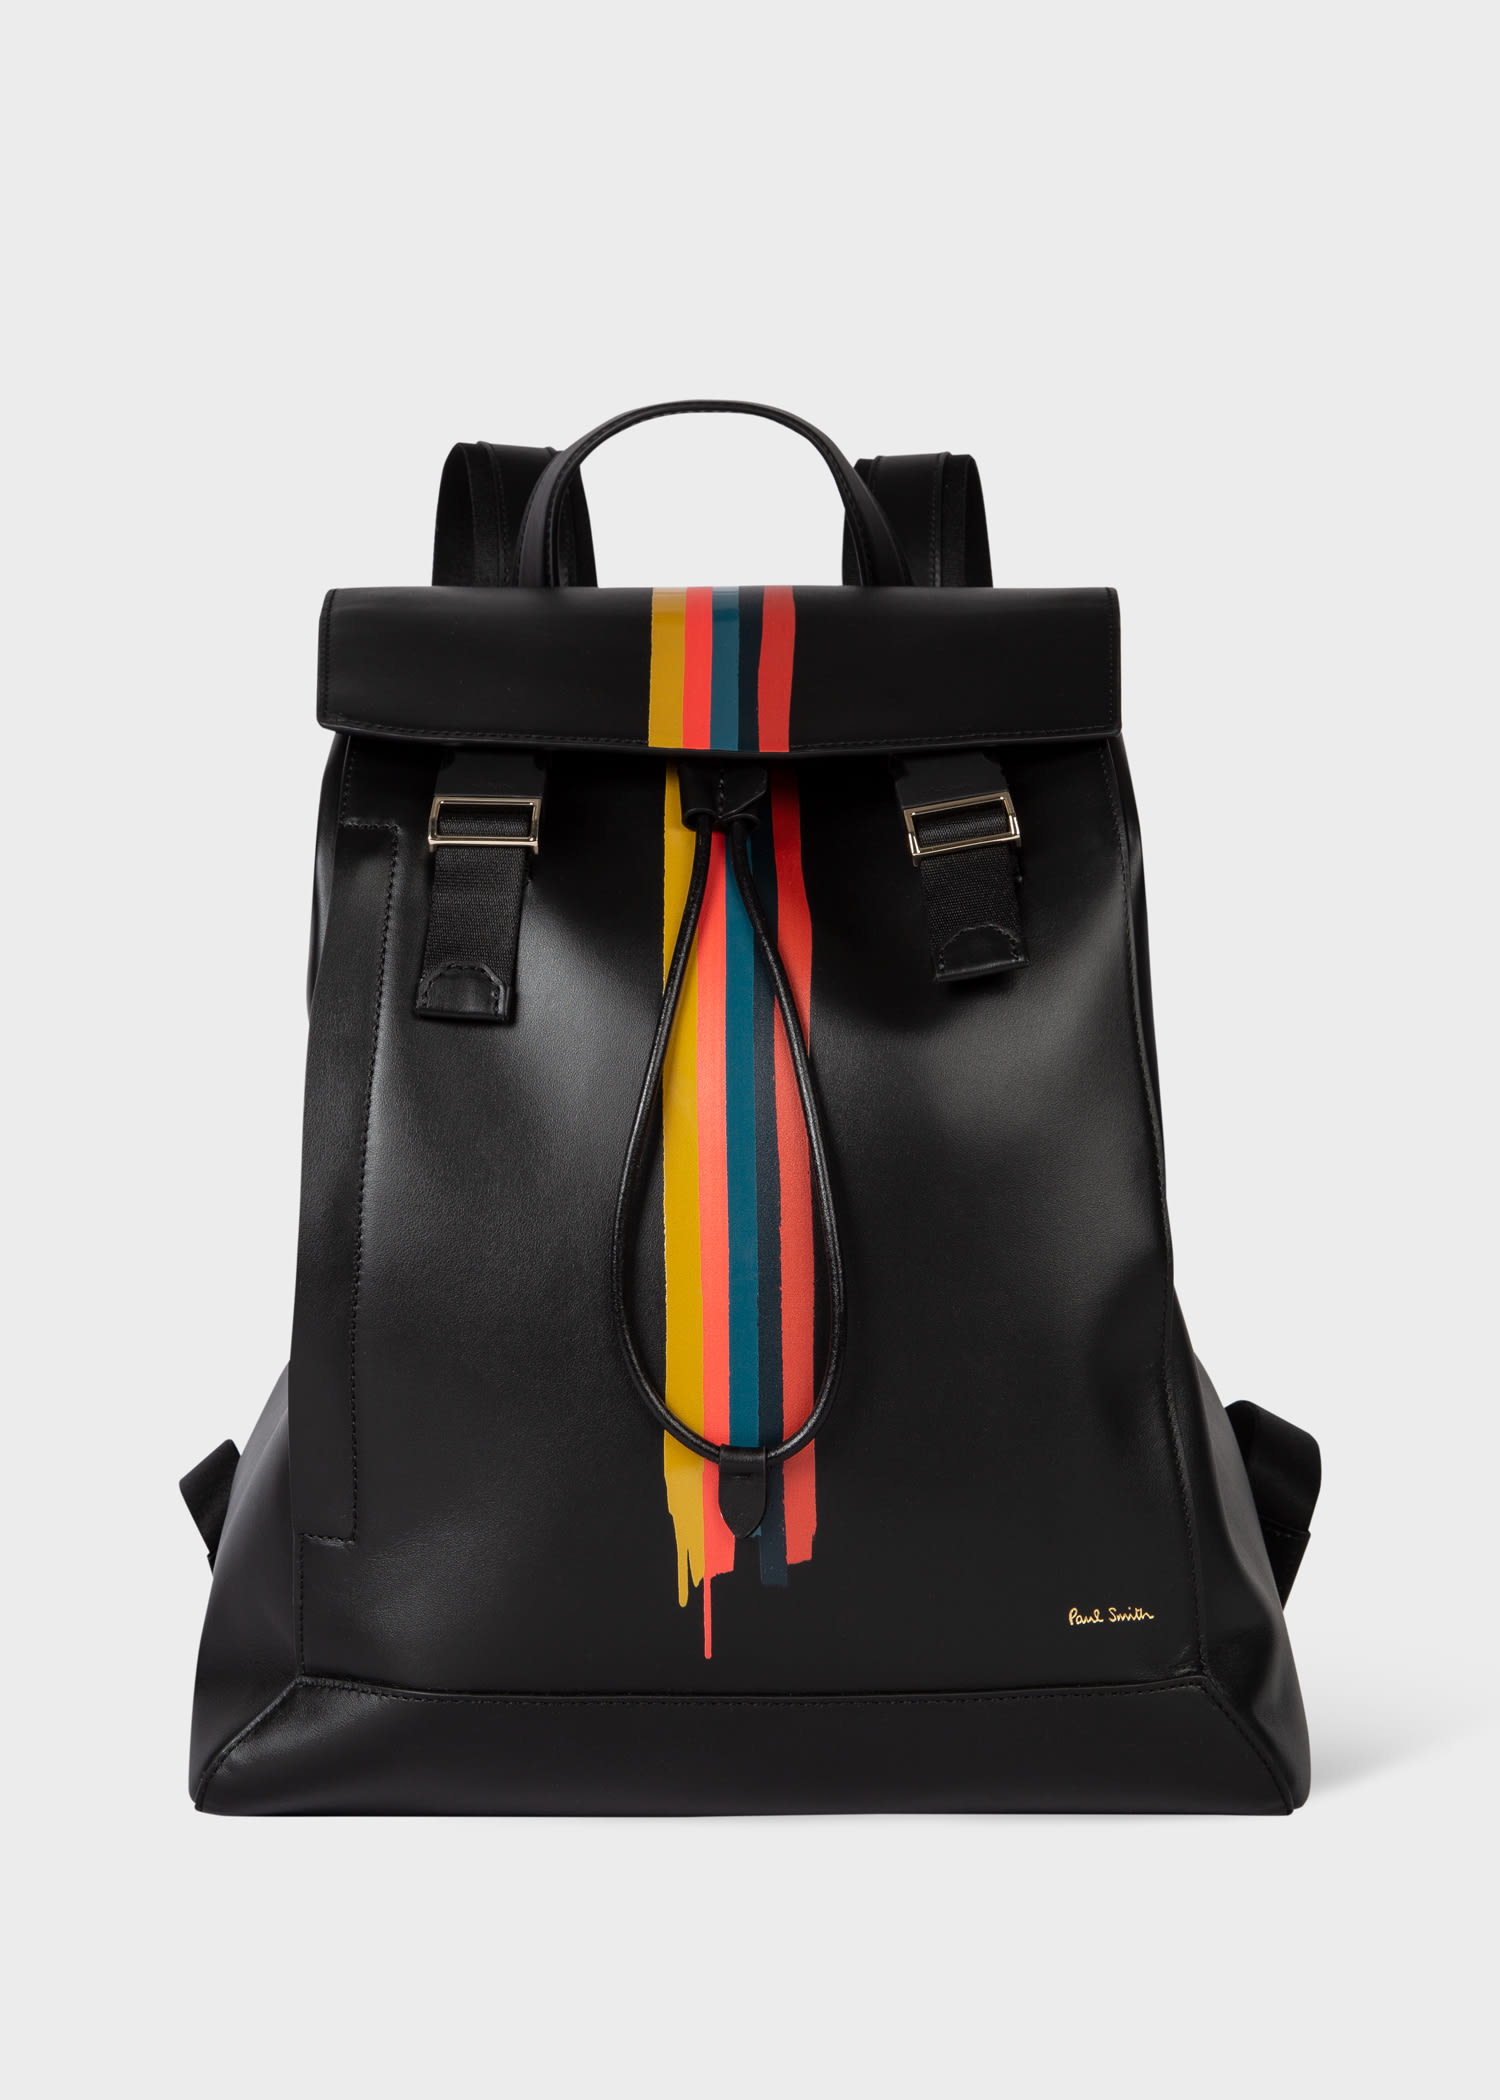 Men's Designer Formal & Everyday Leather Accessories - Paul Smith